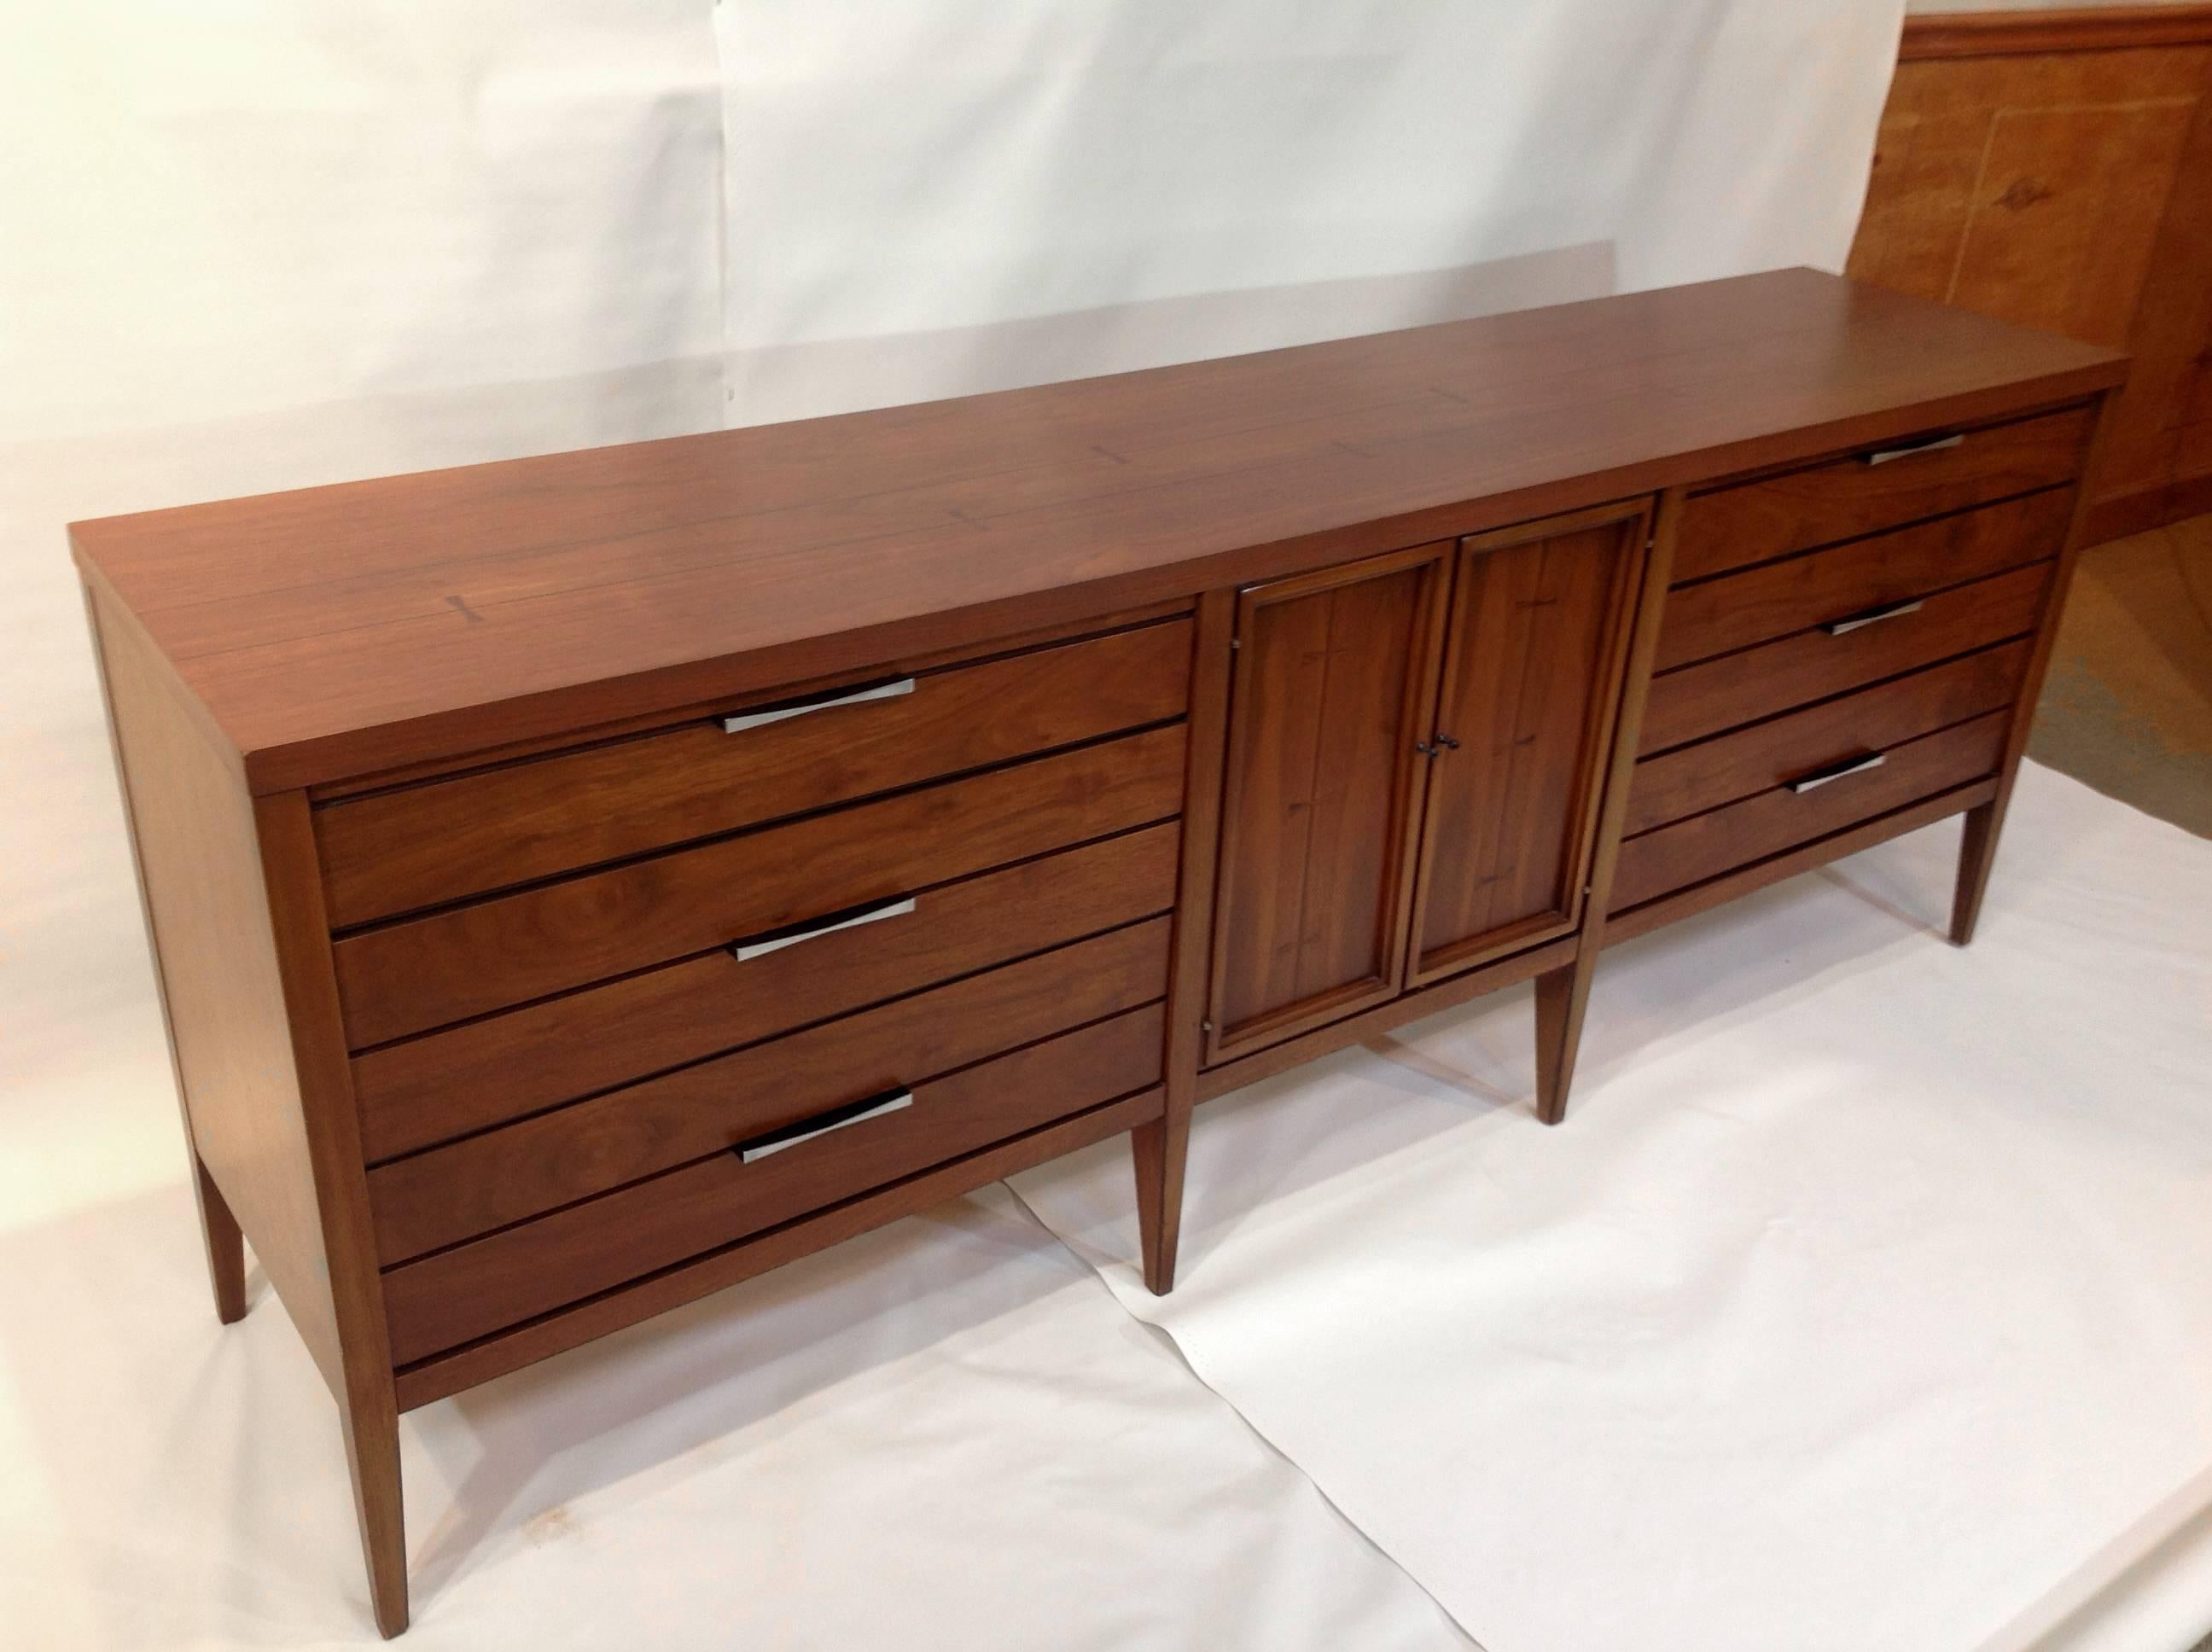 Large, exceptional Mid-Century walnut wood dresser manufactured in 1963, by American manufacturer Lane. This dresser is from the "Tuxedo" line and has little tuxedos inlaid in lighter wood across the top of the piece as well as on the